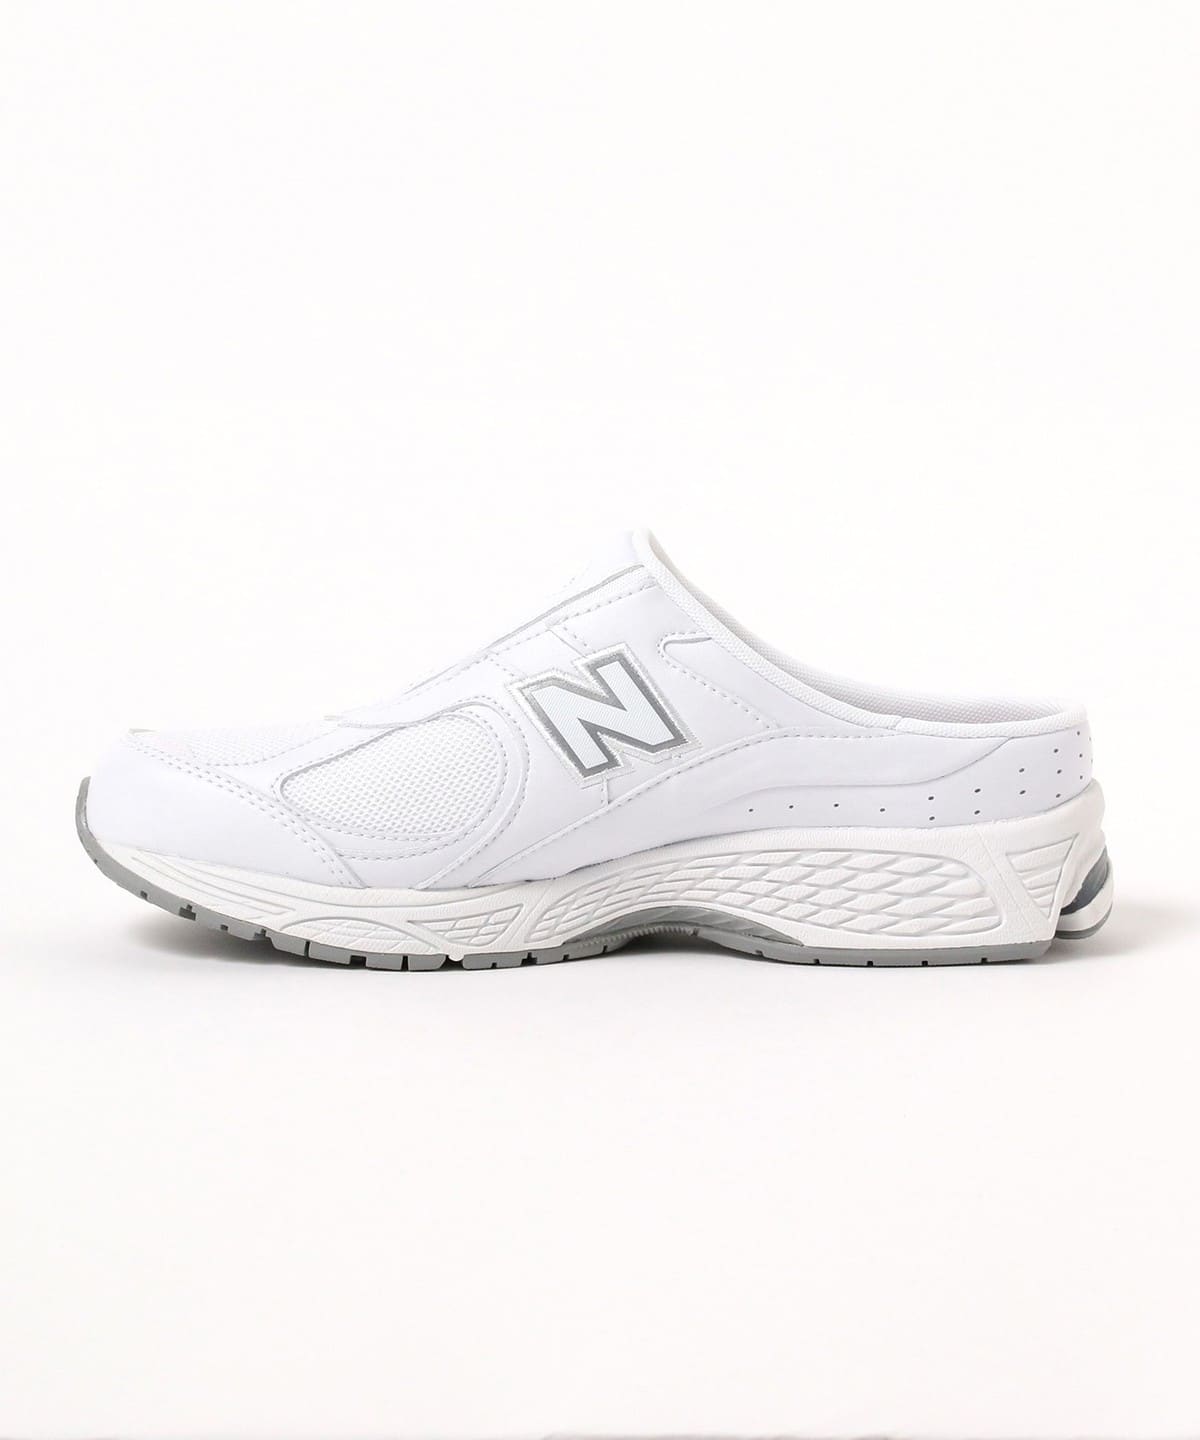 BEAMS (BEAMS) NEW BALANCE / Special order M2002 RM3 (shoes sandals